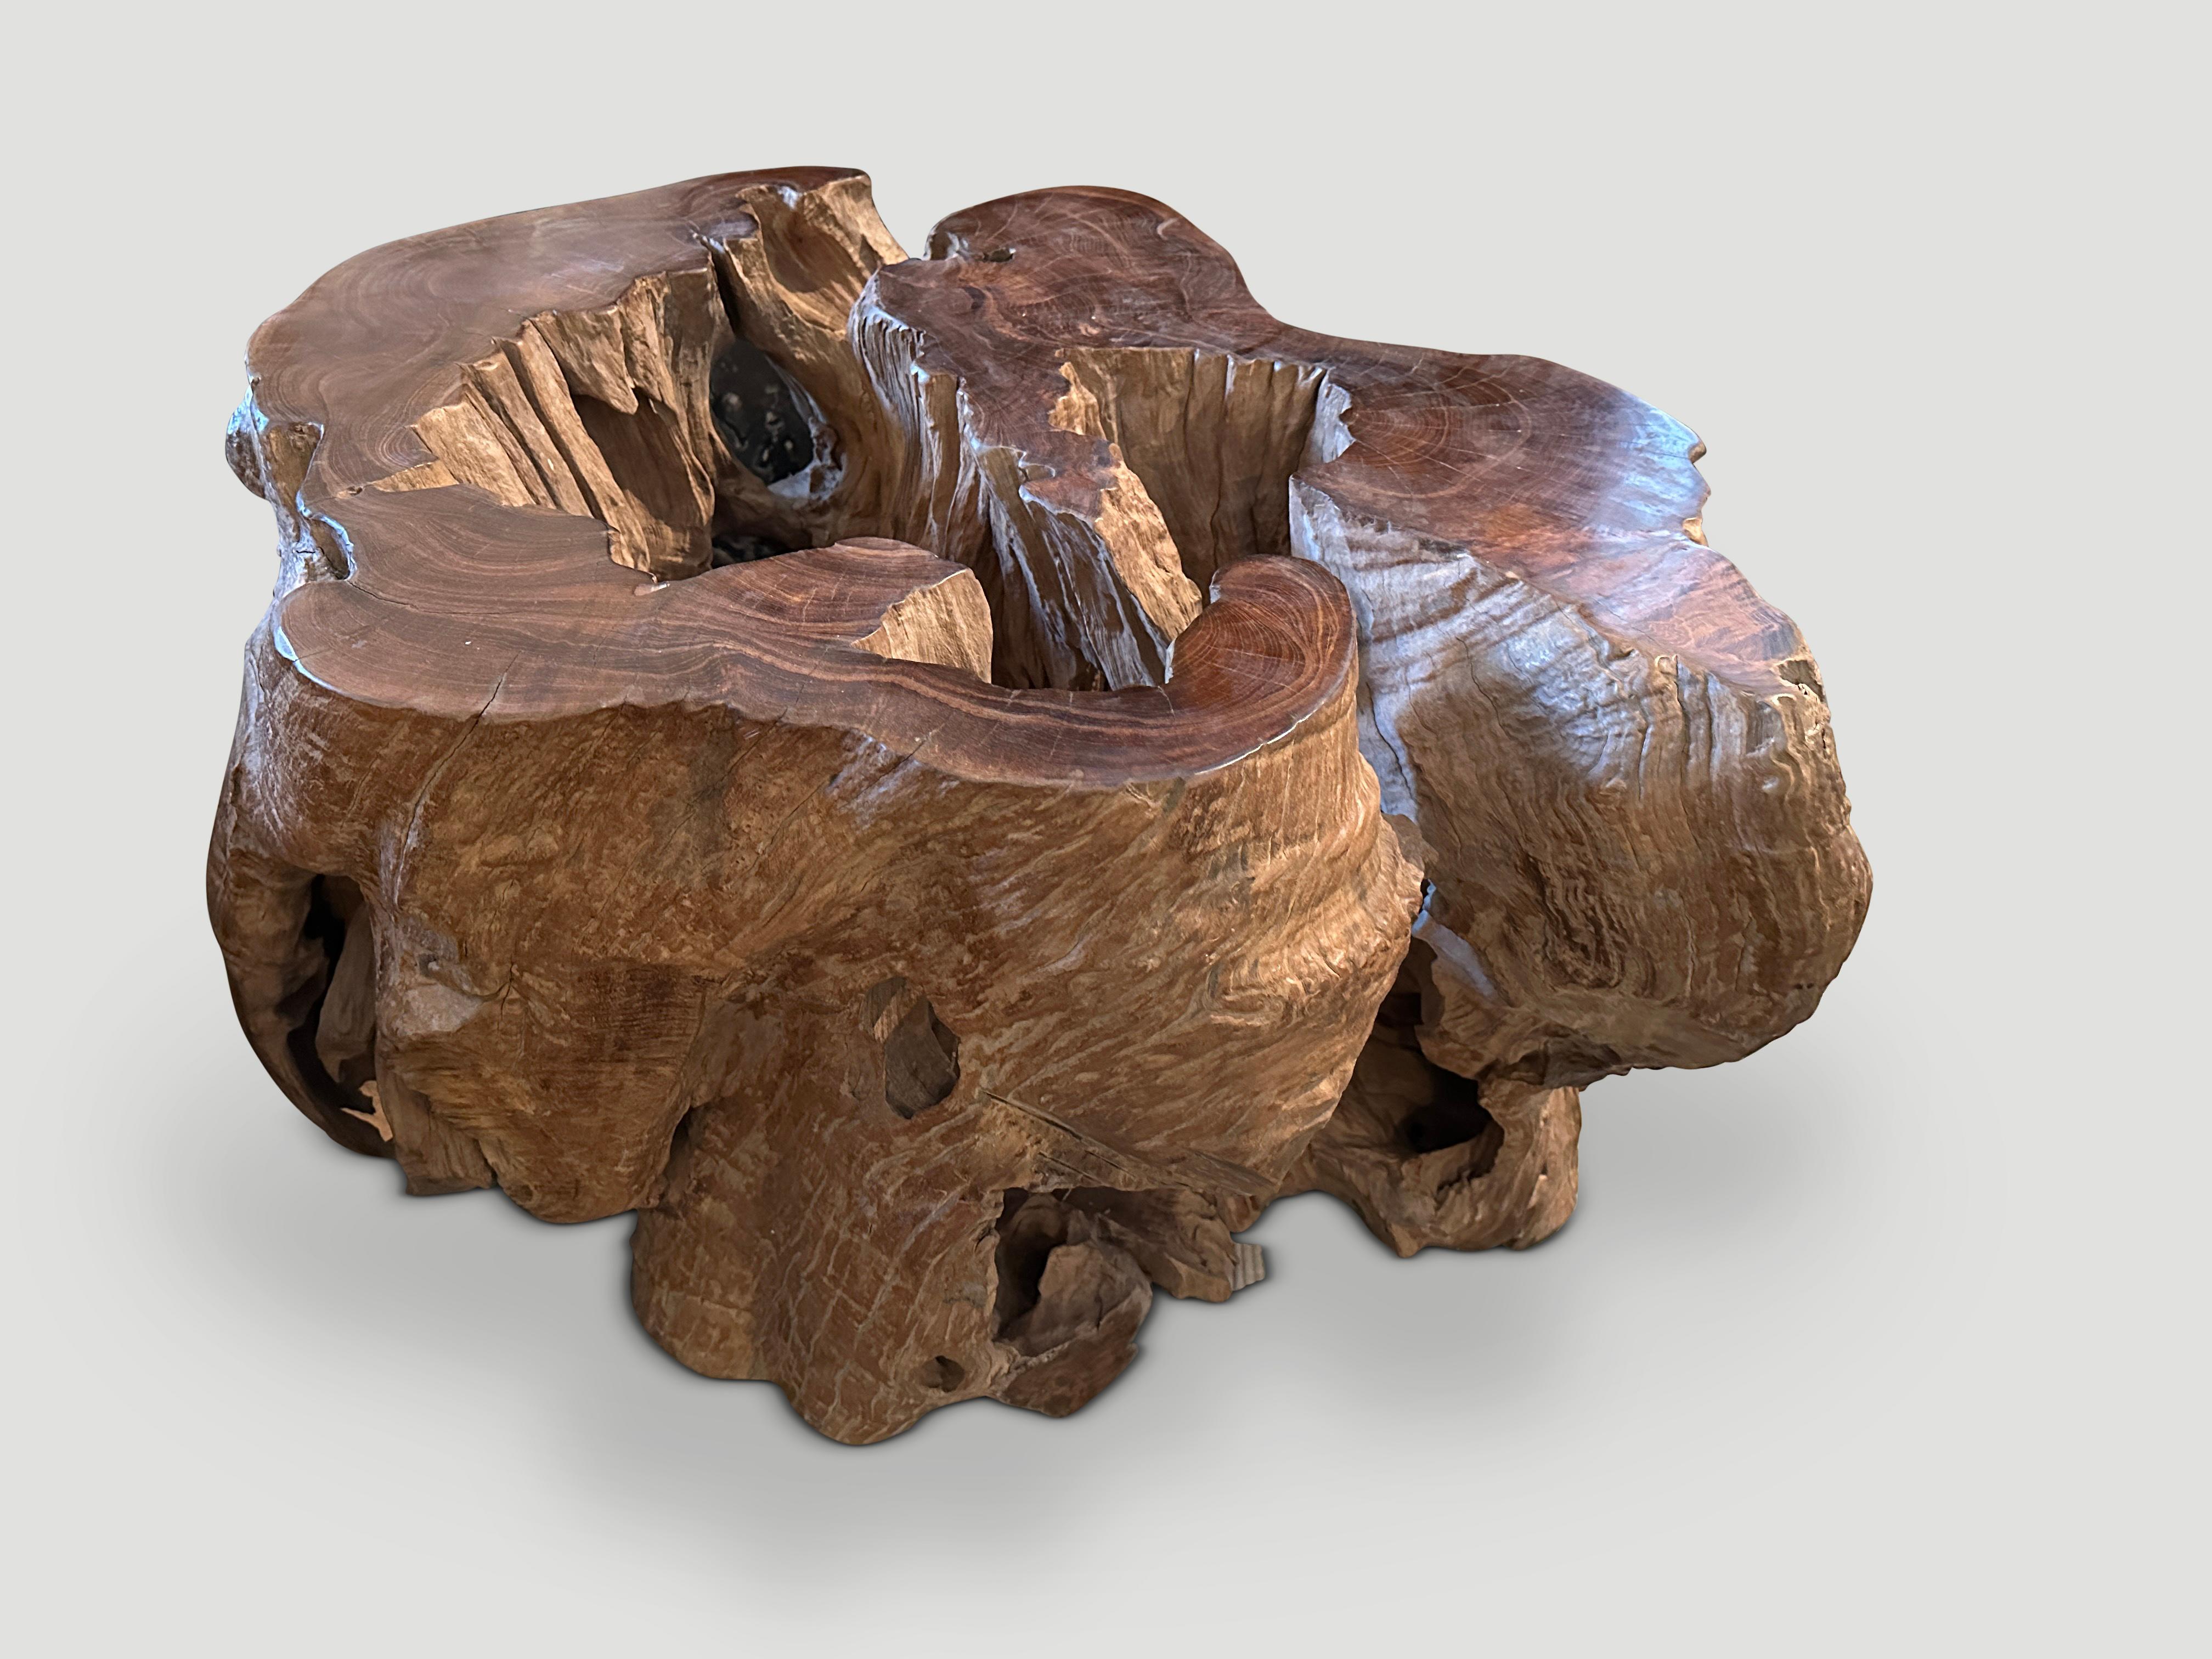 Andrianna Shamaris Organic Teak Wood Coffee Table or Pedestal In Excellent Condition For Sale In New York, NY